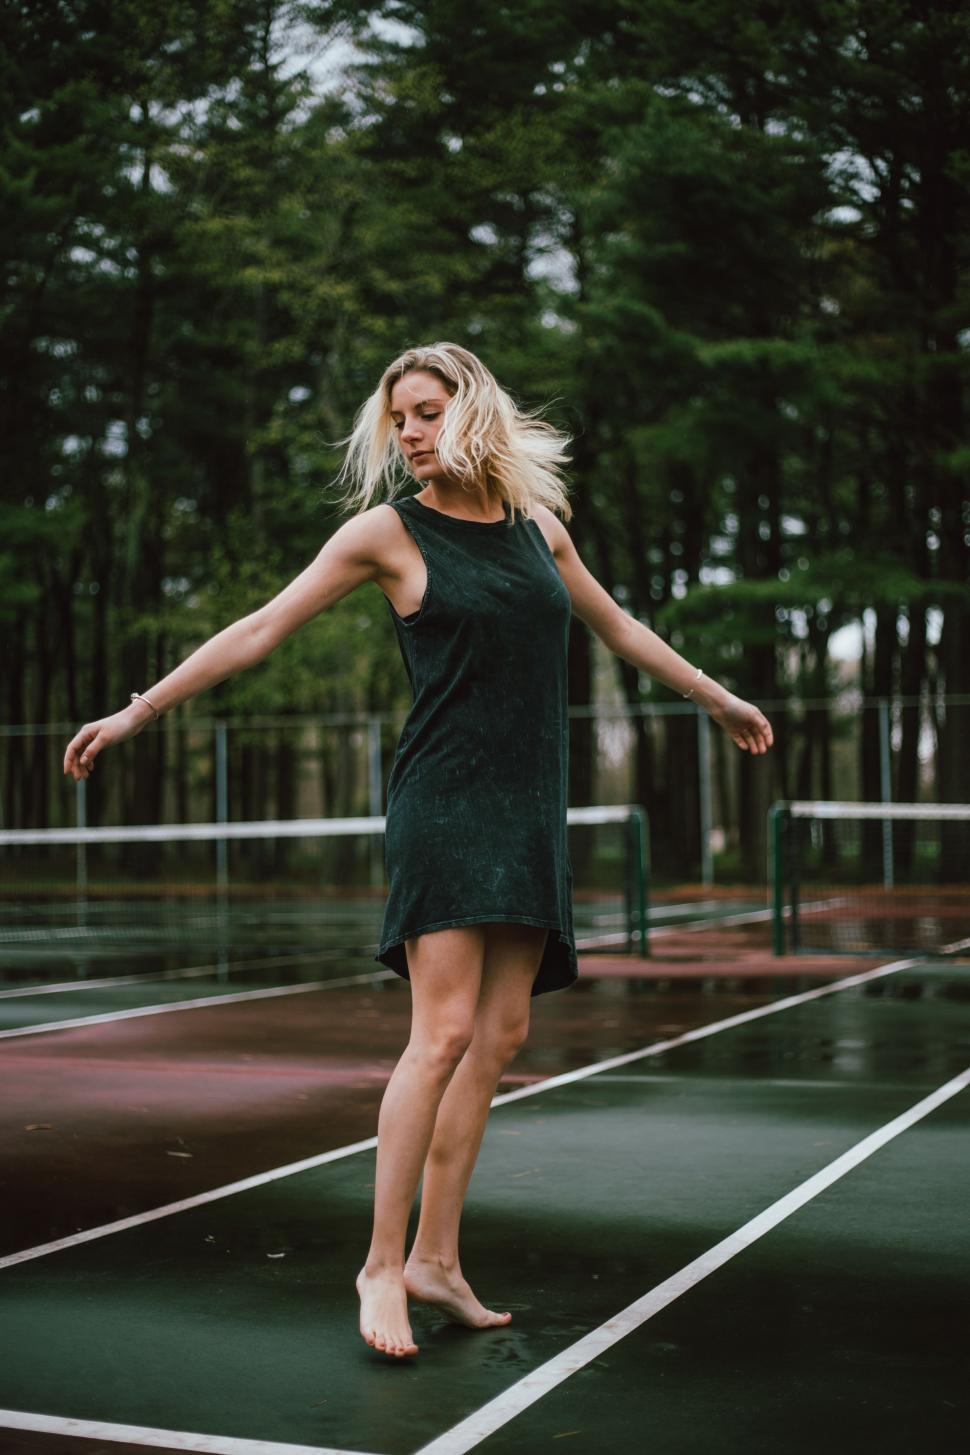 Free Image of Woman Standing on Tennis Court 